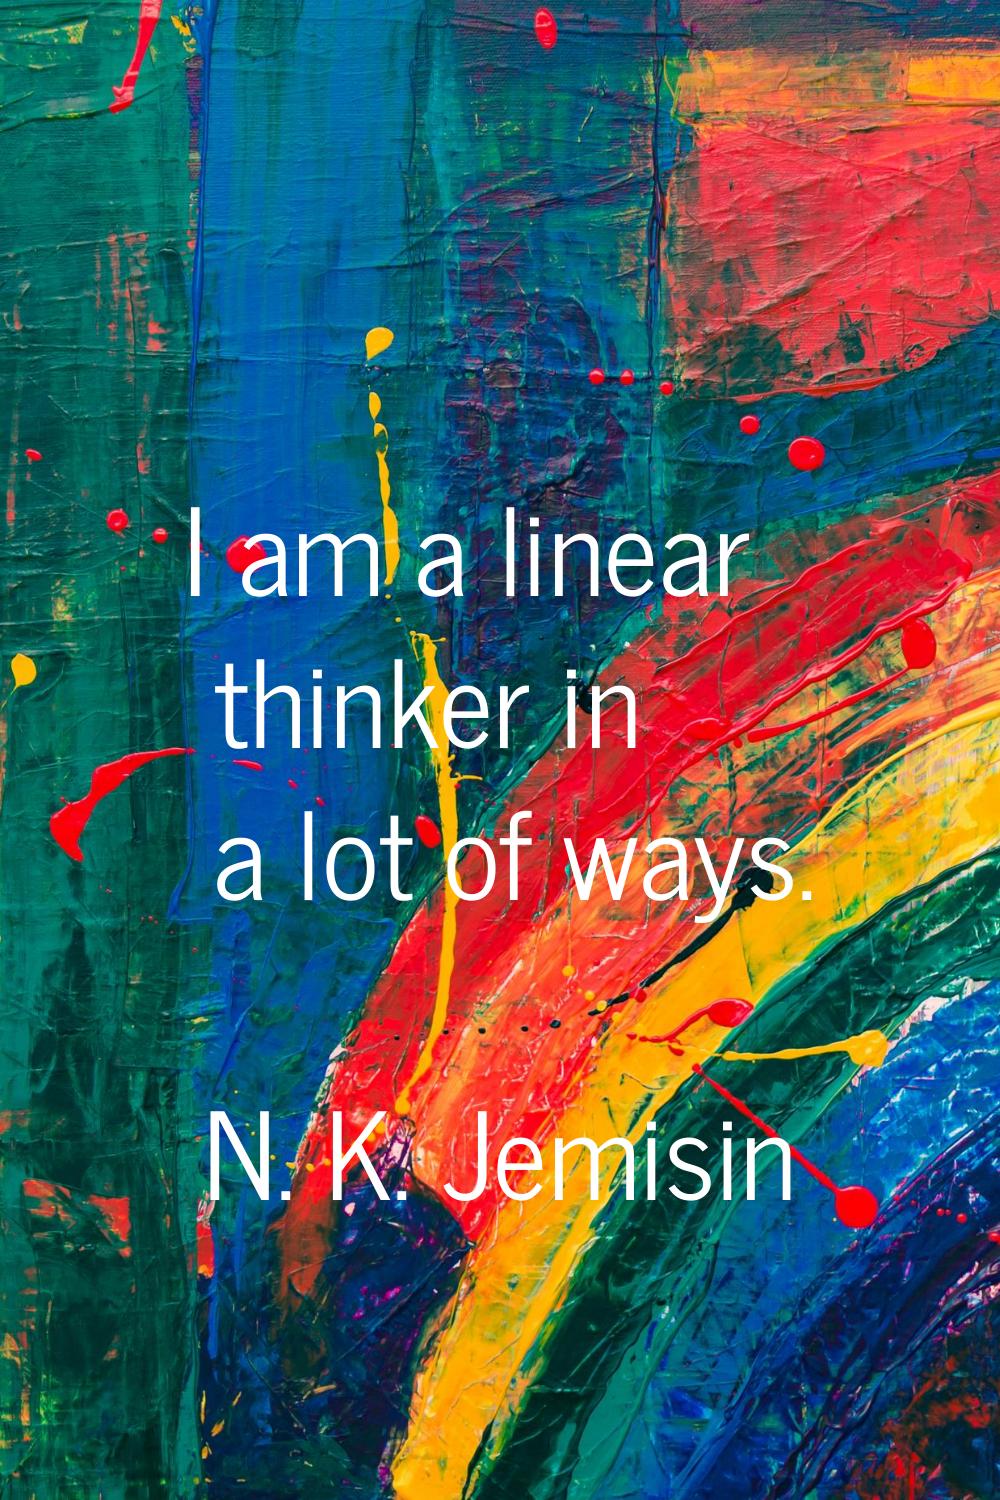 I am a linear thinker in a lot of ways.